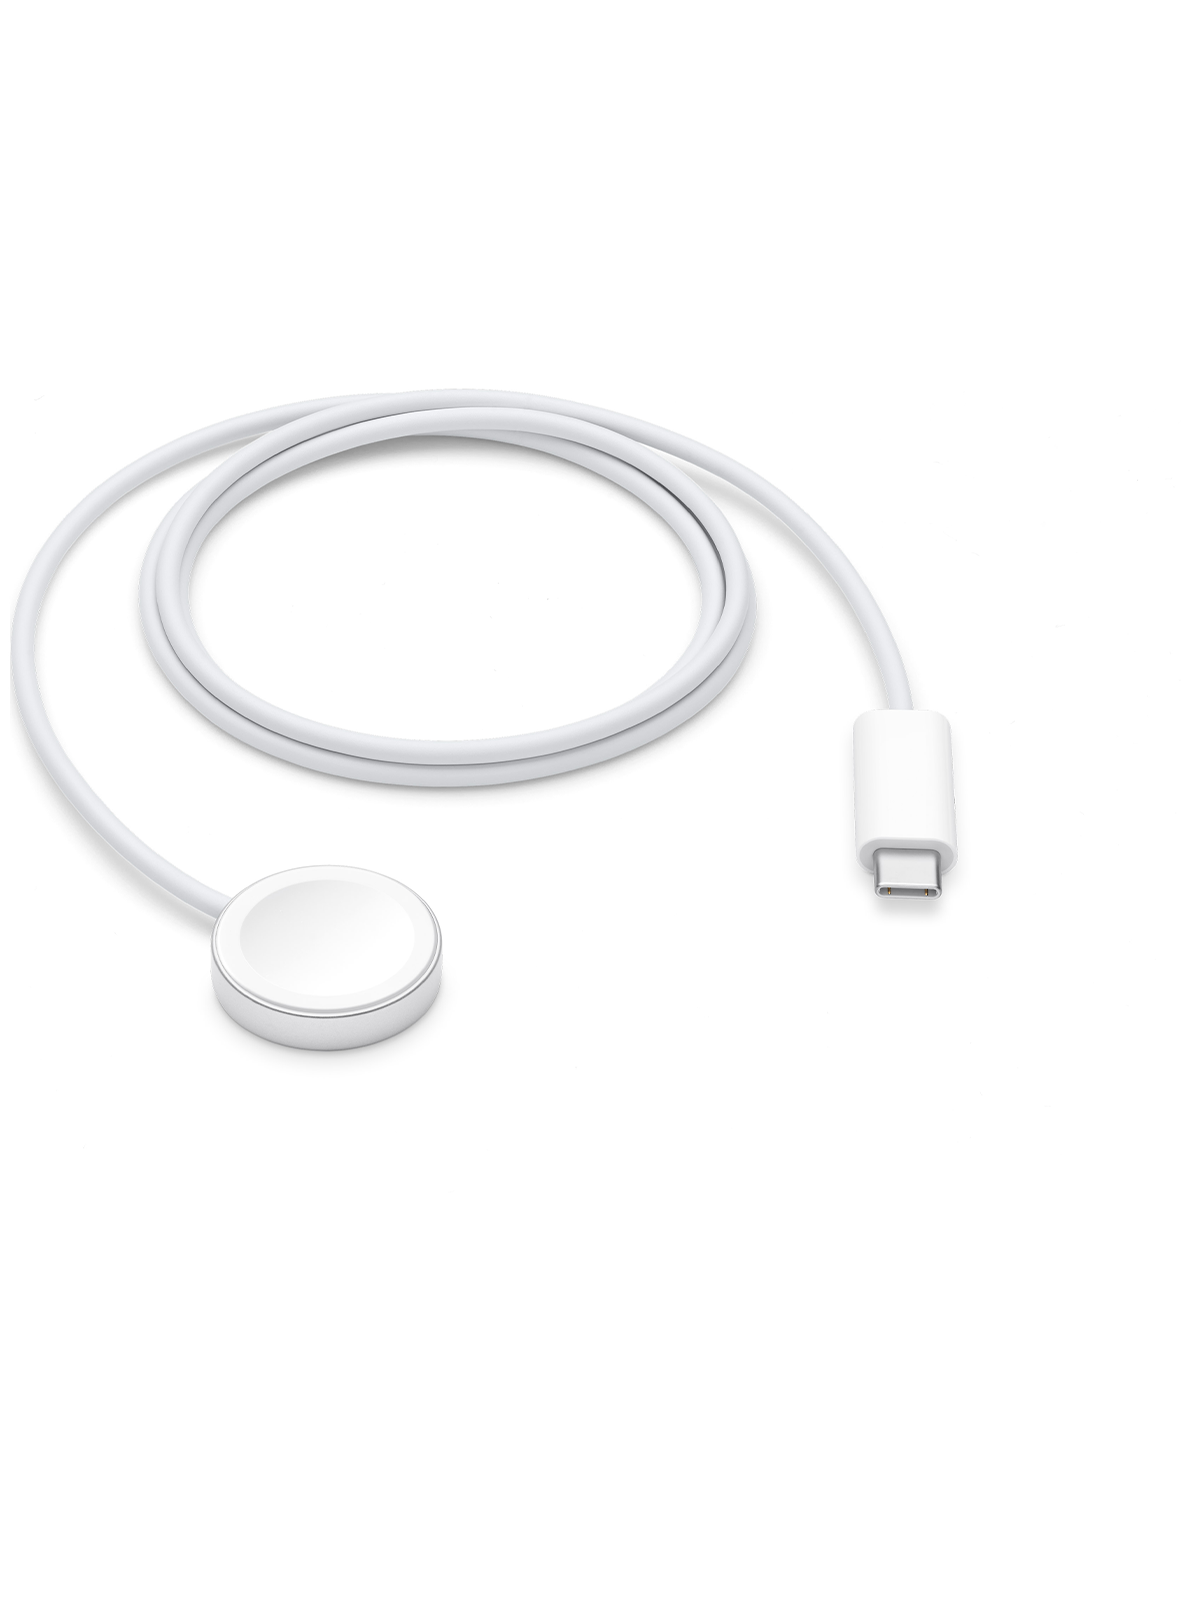 Apple Magnetic Fast Charger to USB-C Cable For Apple Watch